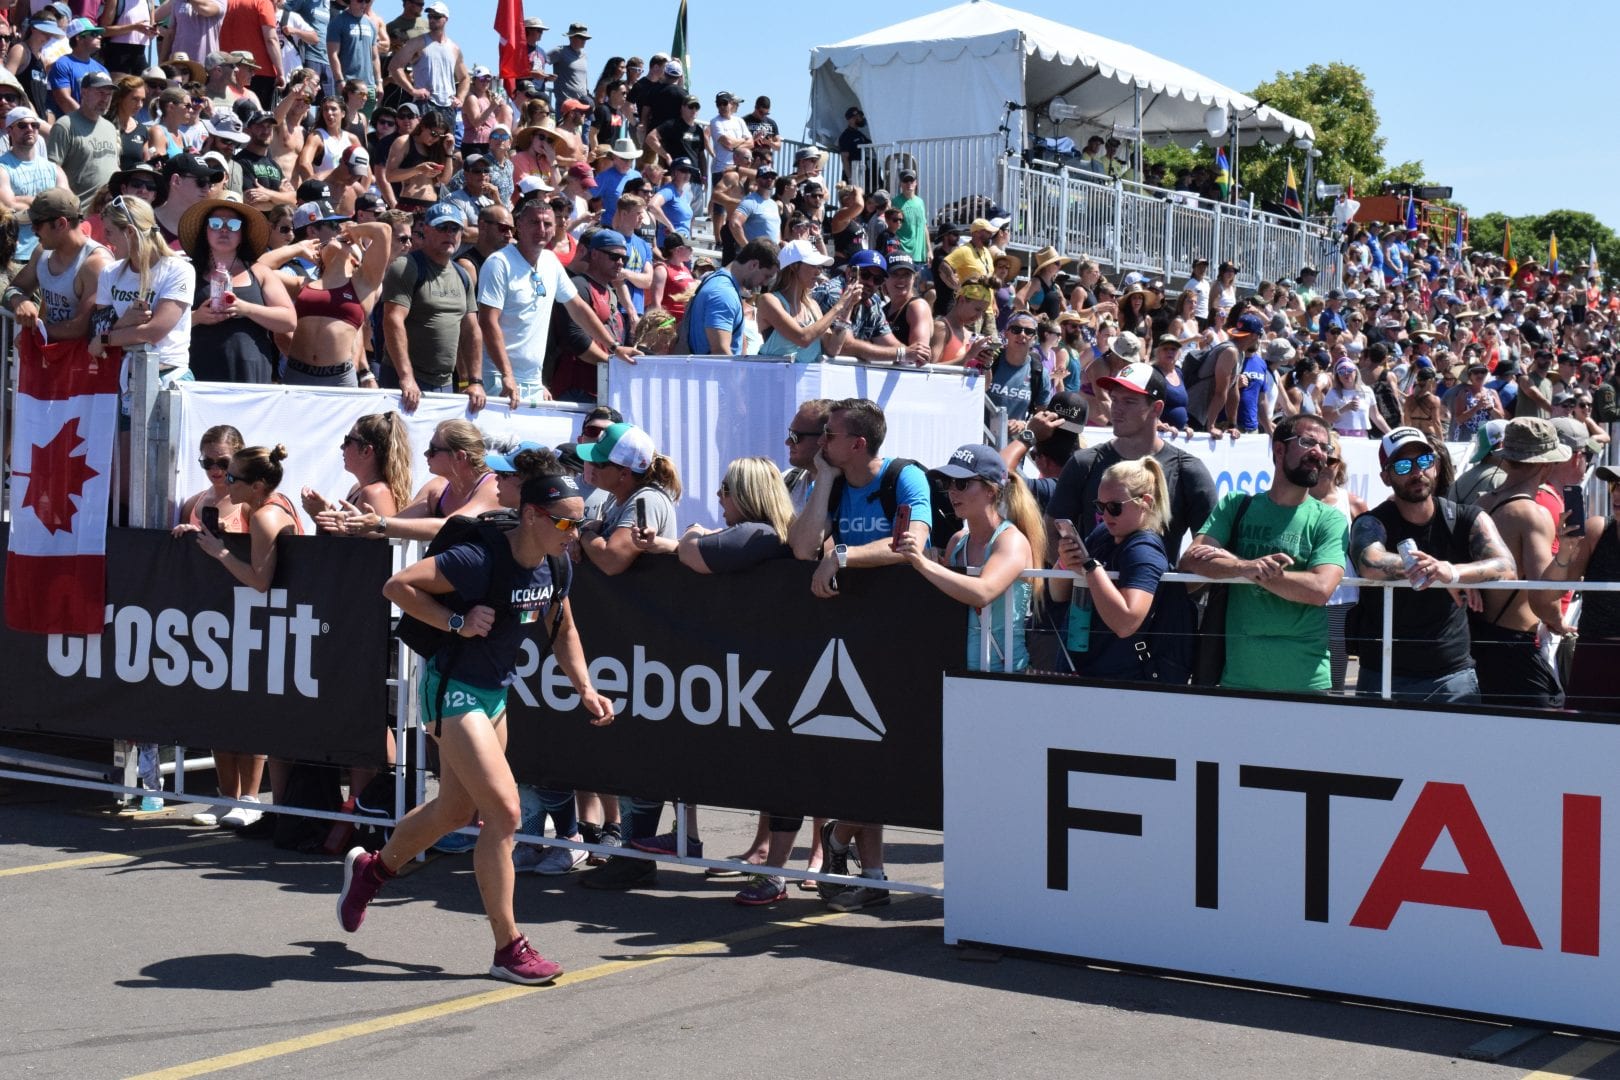 Emma McQuaid completes the Ruck Run event at the 2019 CrossFit Games.